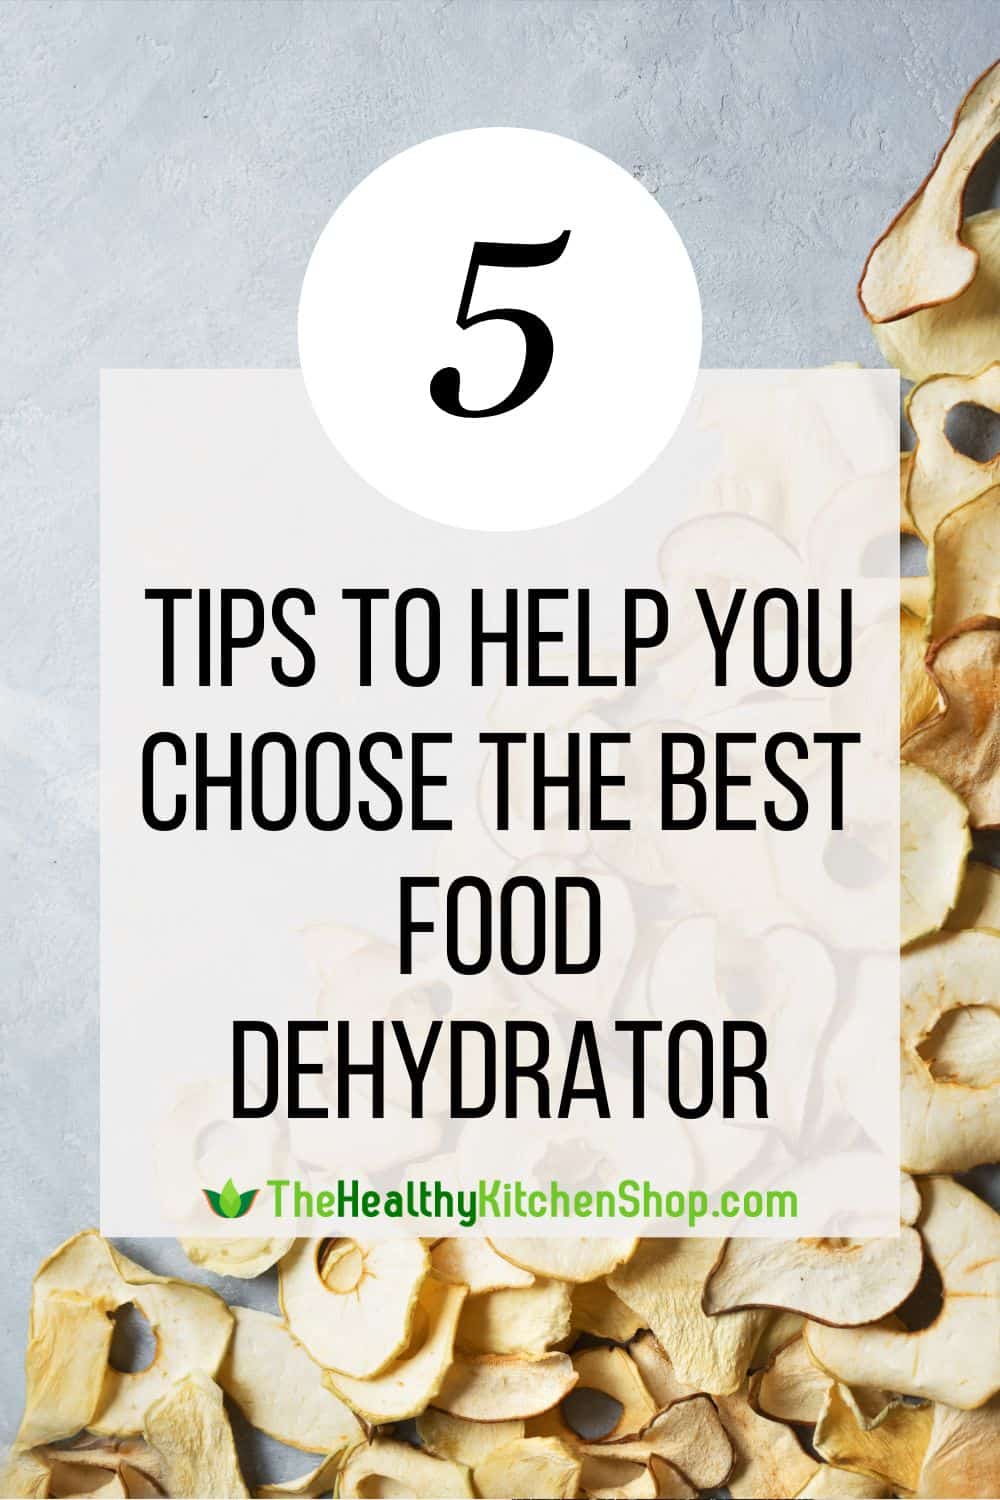 5 Tips to Help You Choose the Best Food Dehydrator